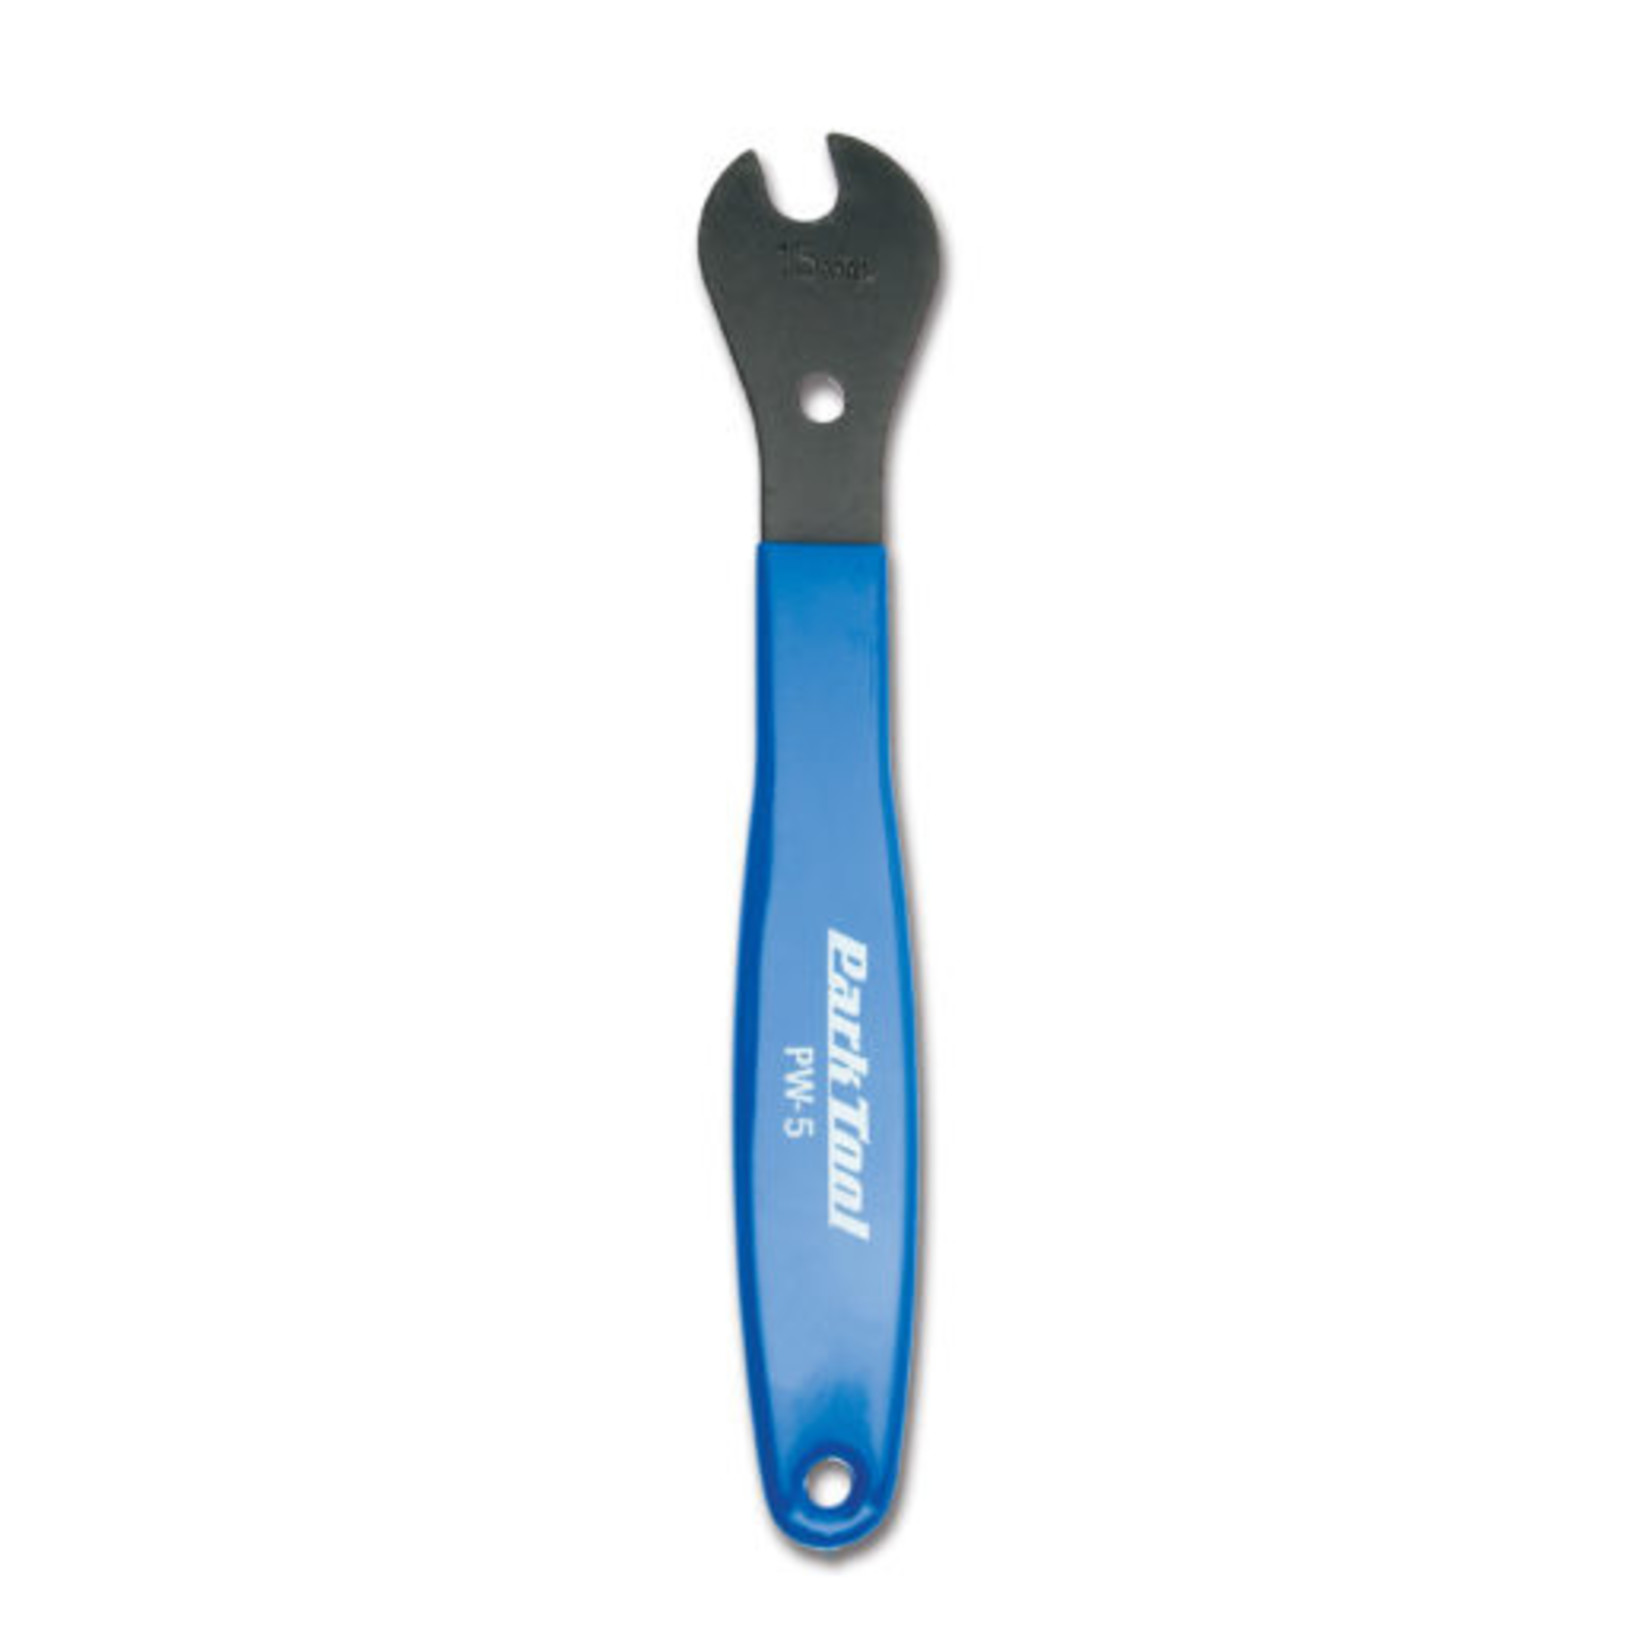 PARK TOOL PW5 Pedal Wrench